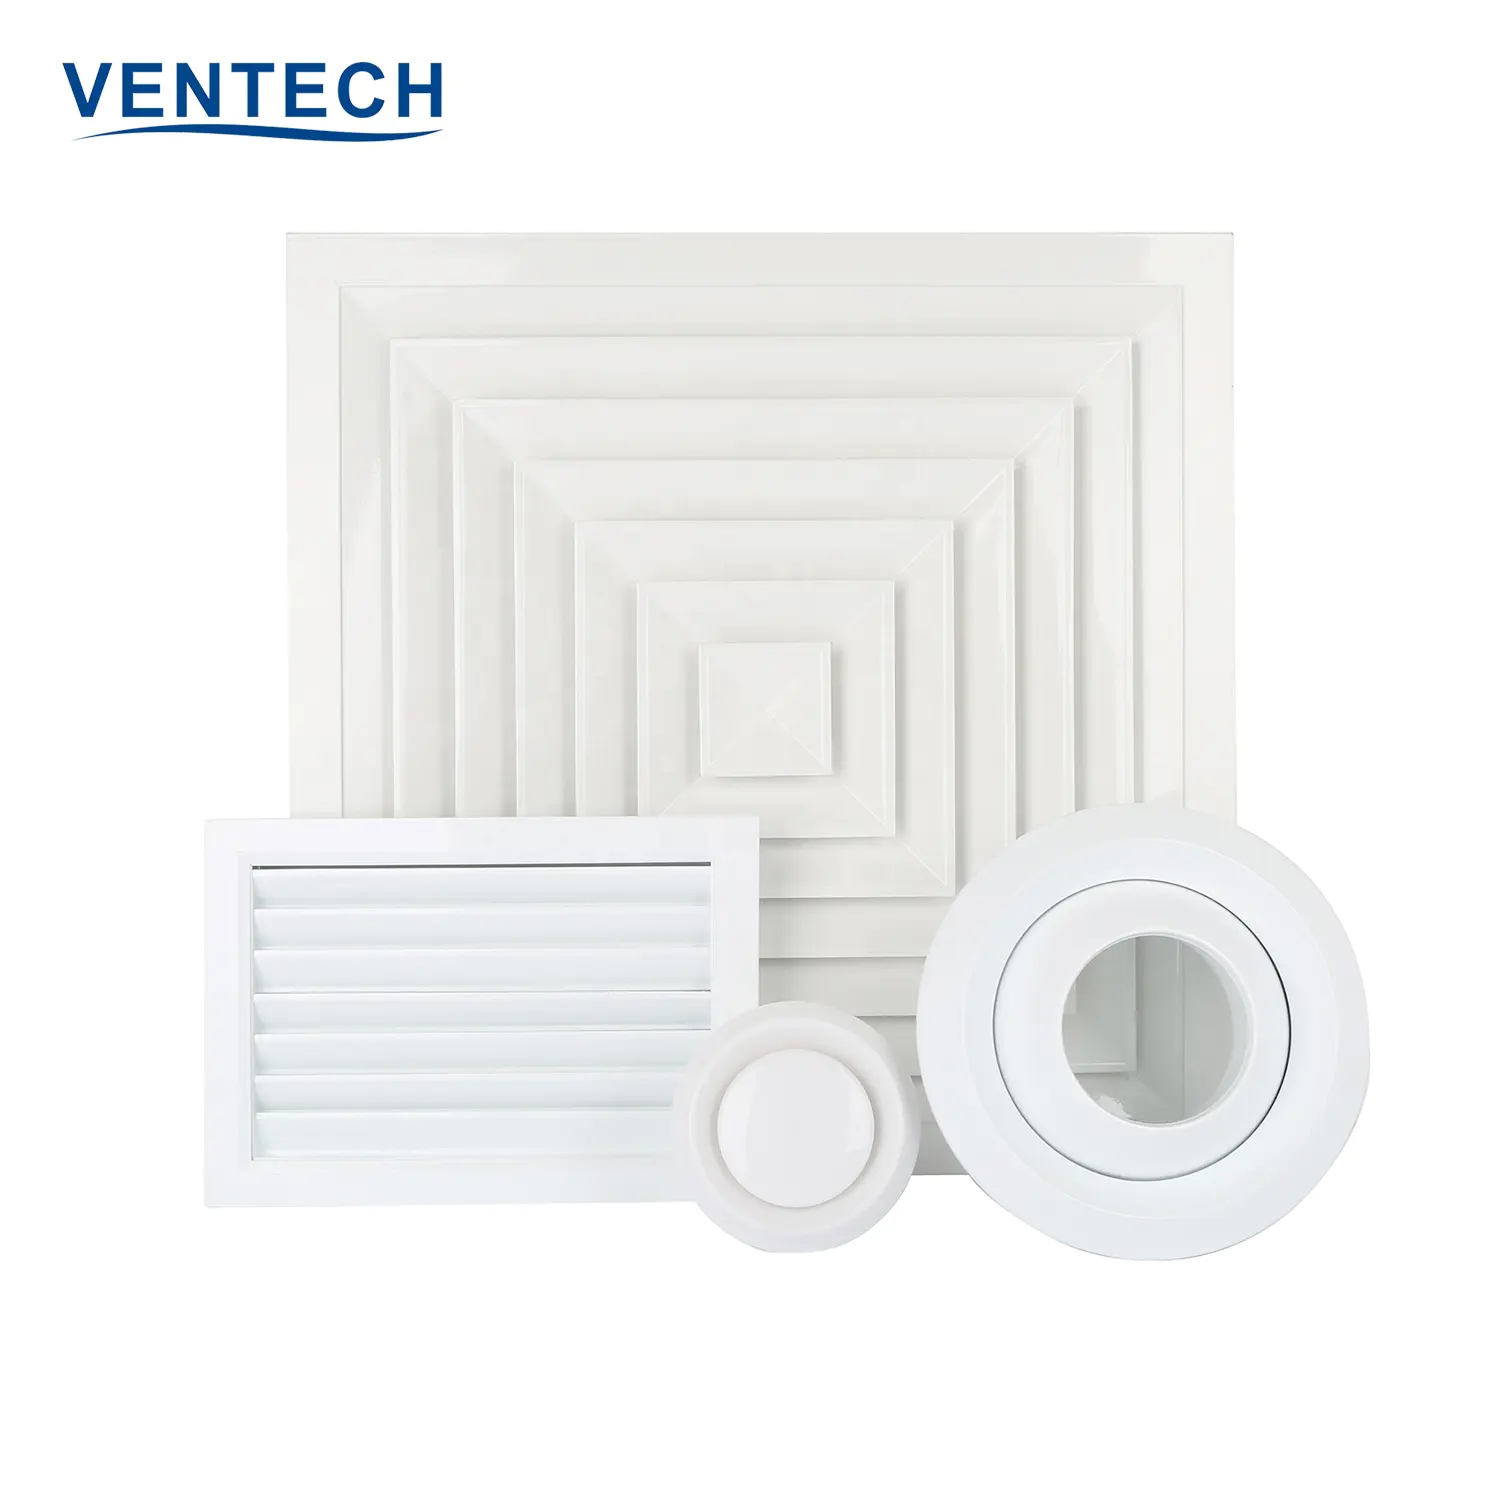 VENTECH Hvac air conditioning air outlets return air square 4 way diffuser